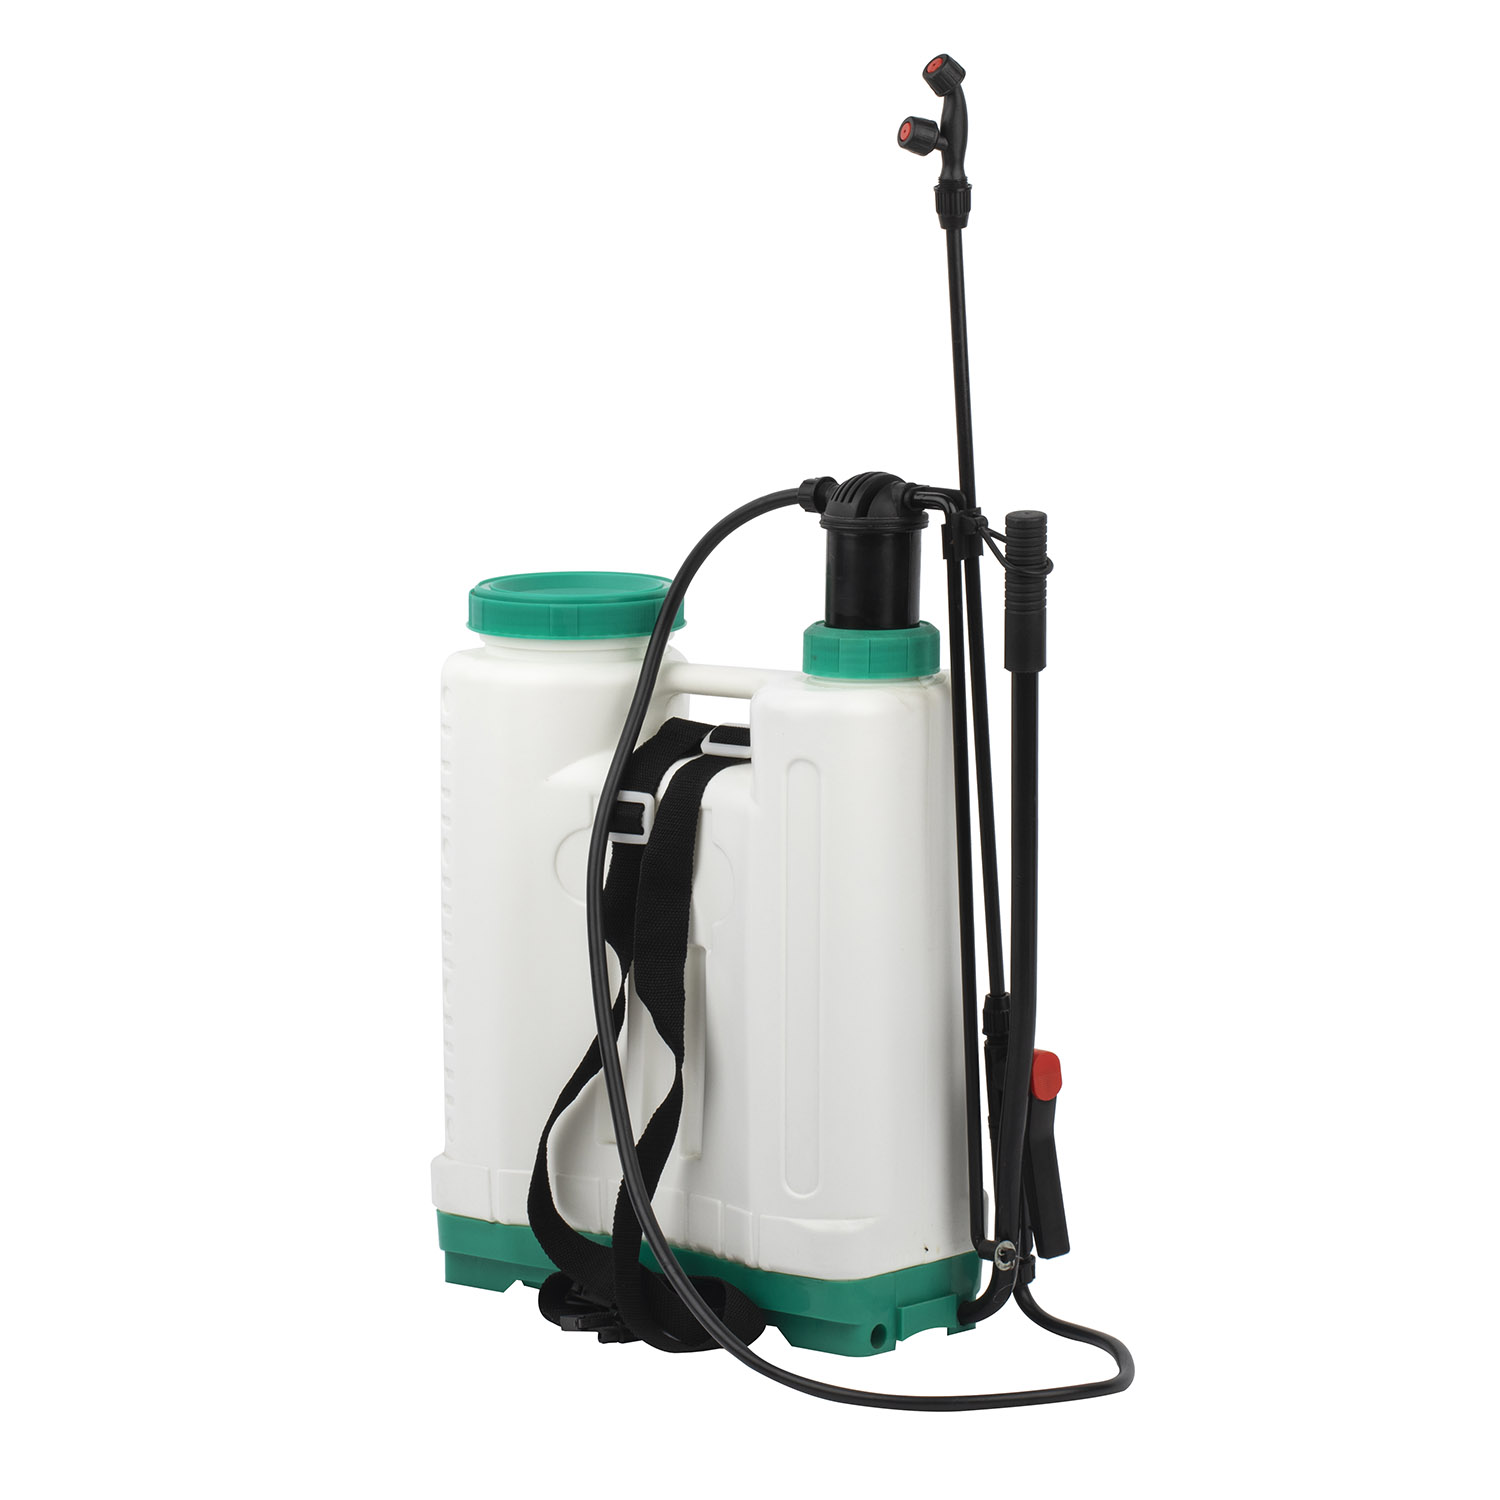 New PE Grapes Hand Sprayer for Agriculture GF-16S-01C